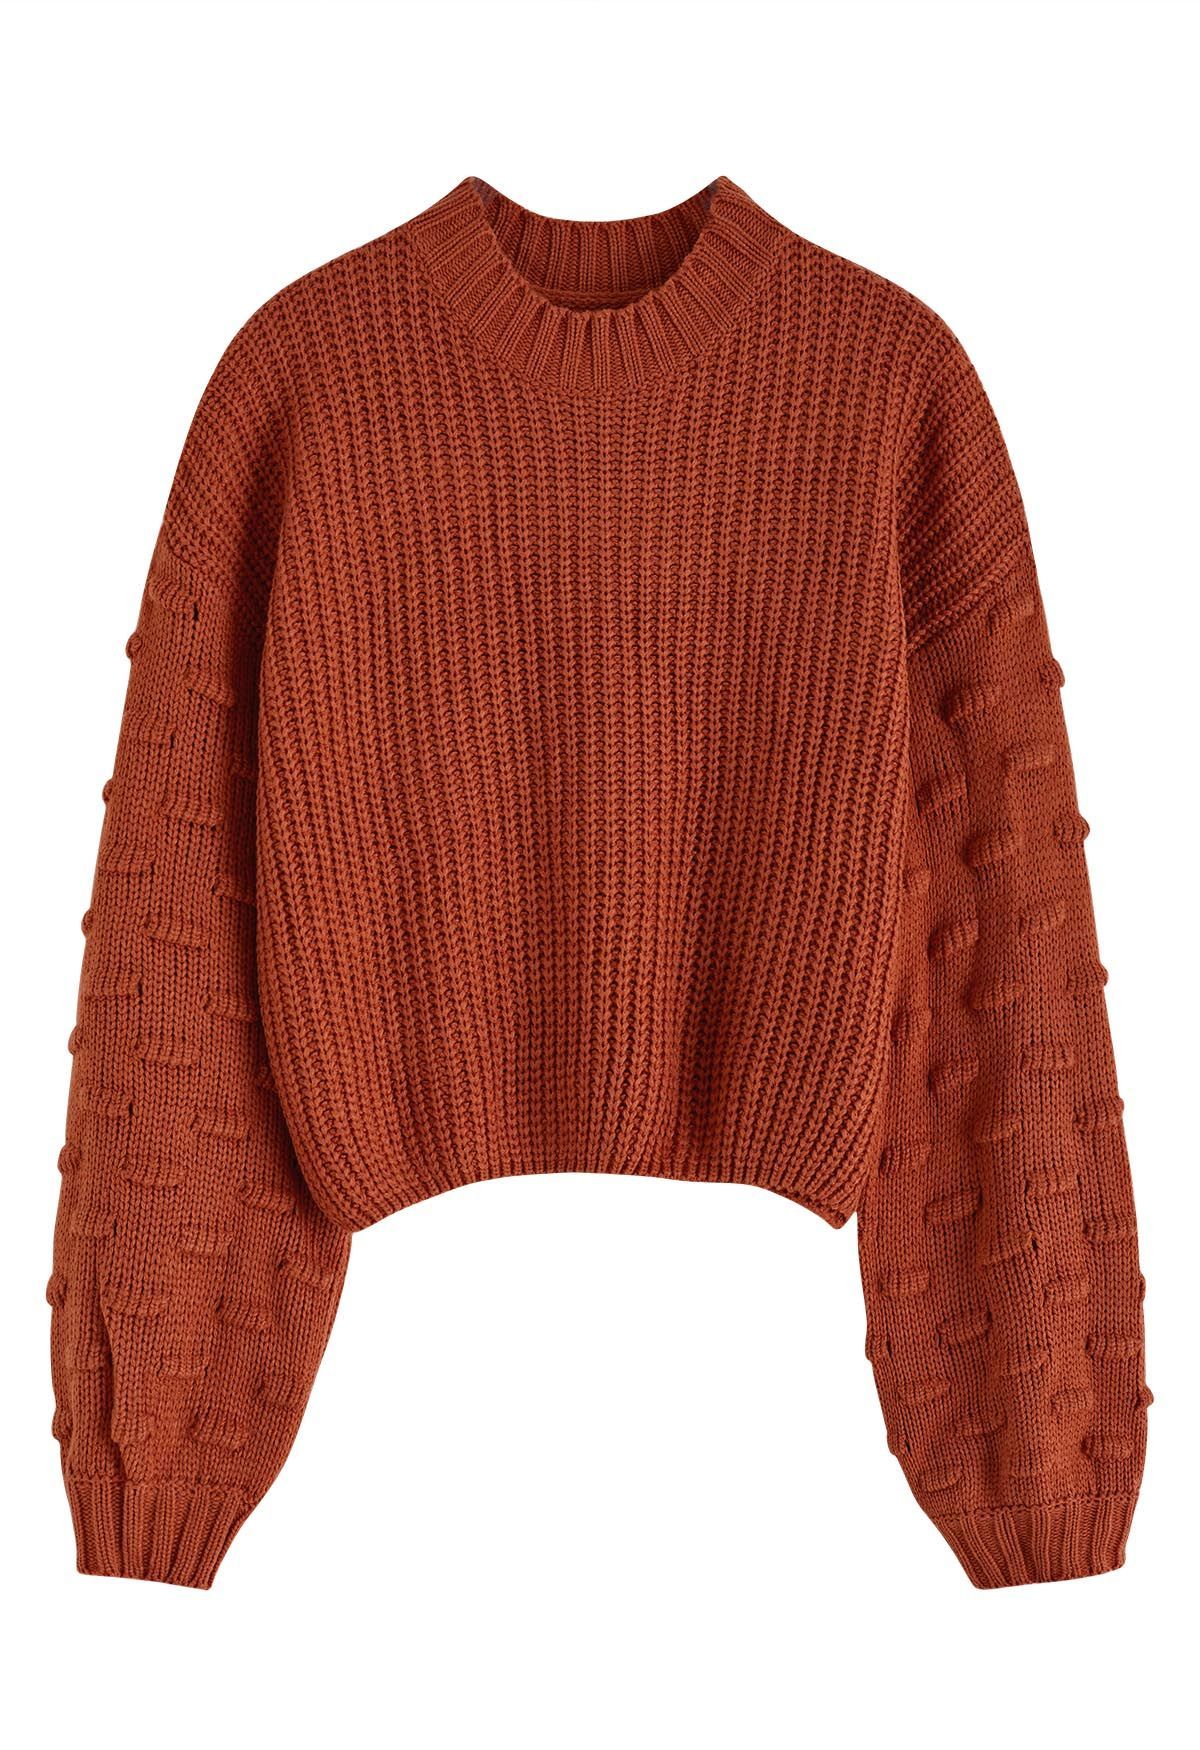 Playful Dotted Puff Sleeve Crop Sweater in Pumpkin | Chicwish